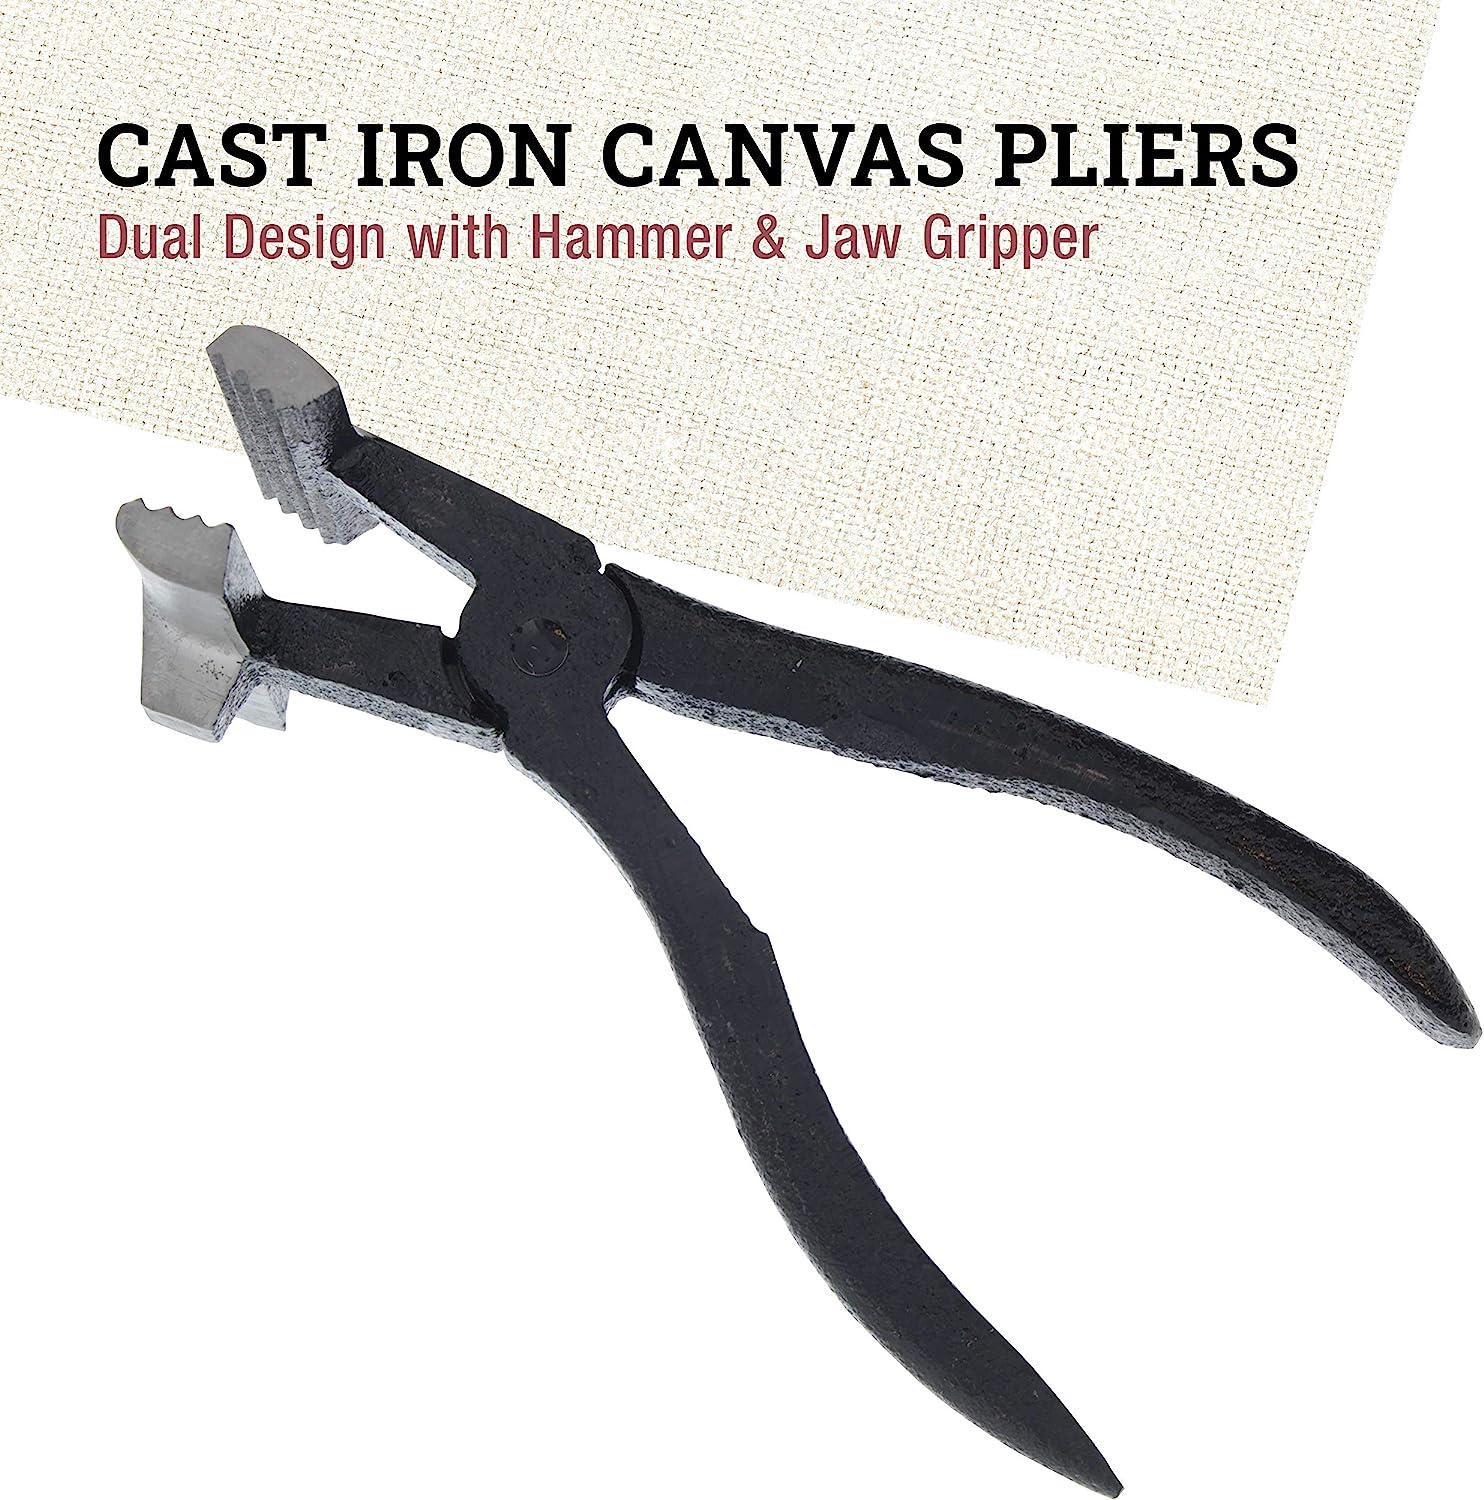 US Art Supply Iron Canvas Pliers, Dual Design with Hammer & Jaw